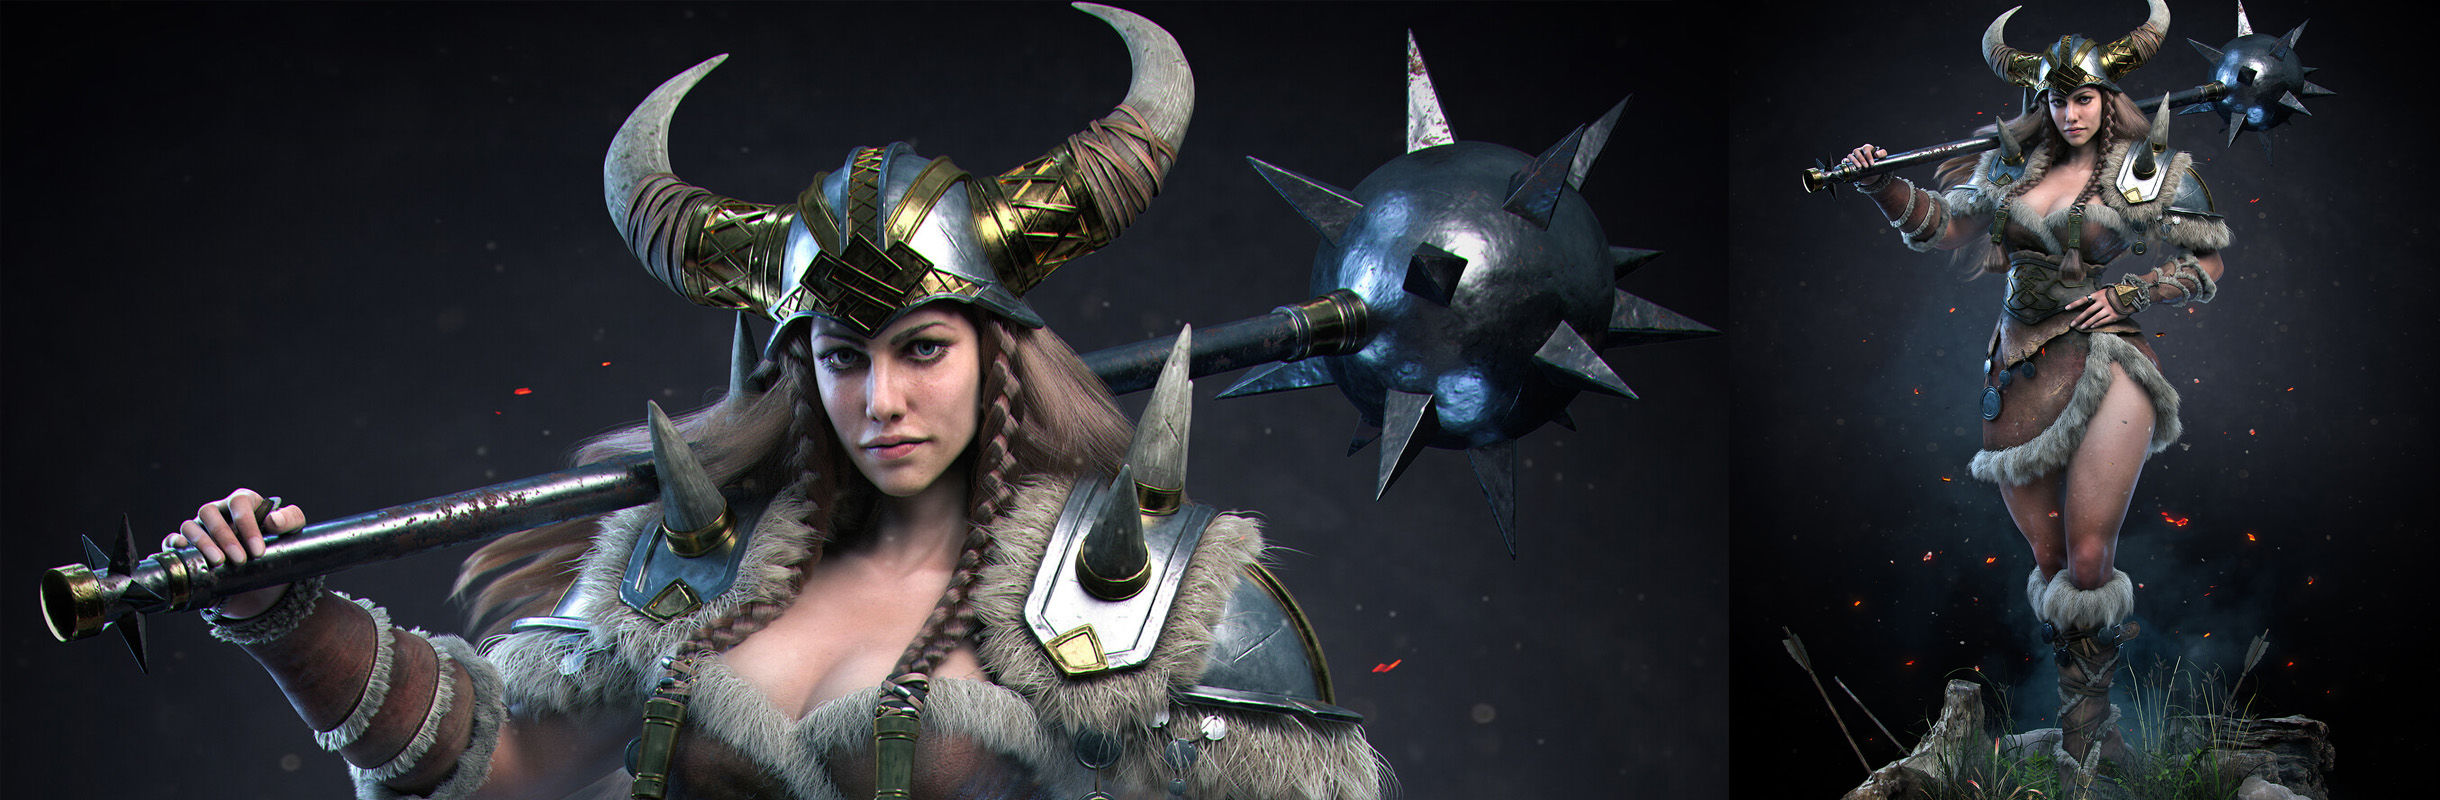 What is the most functional female armor design in video games